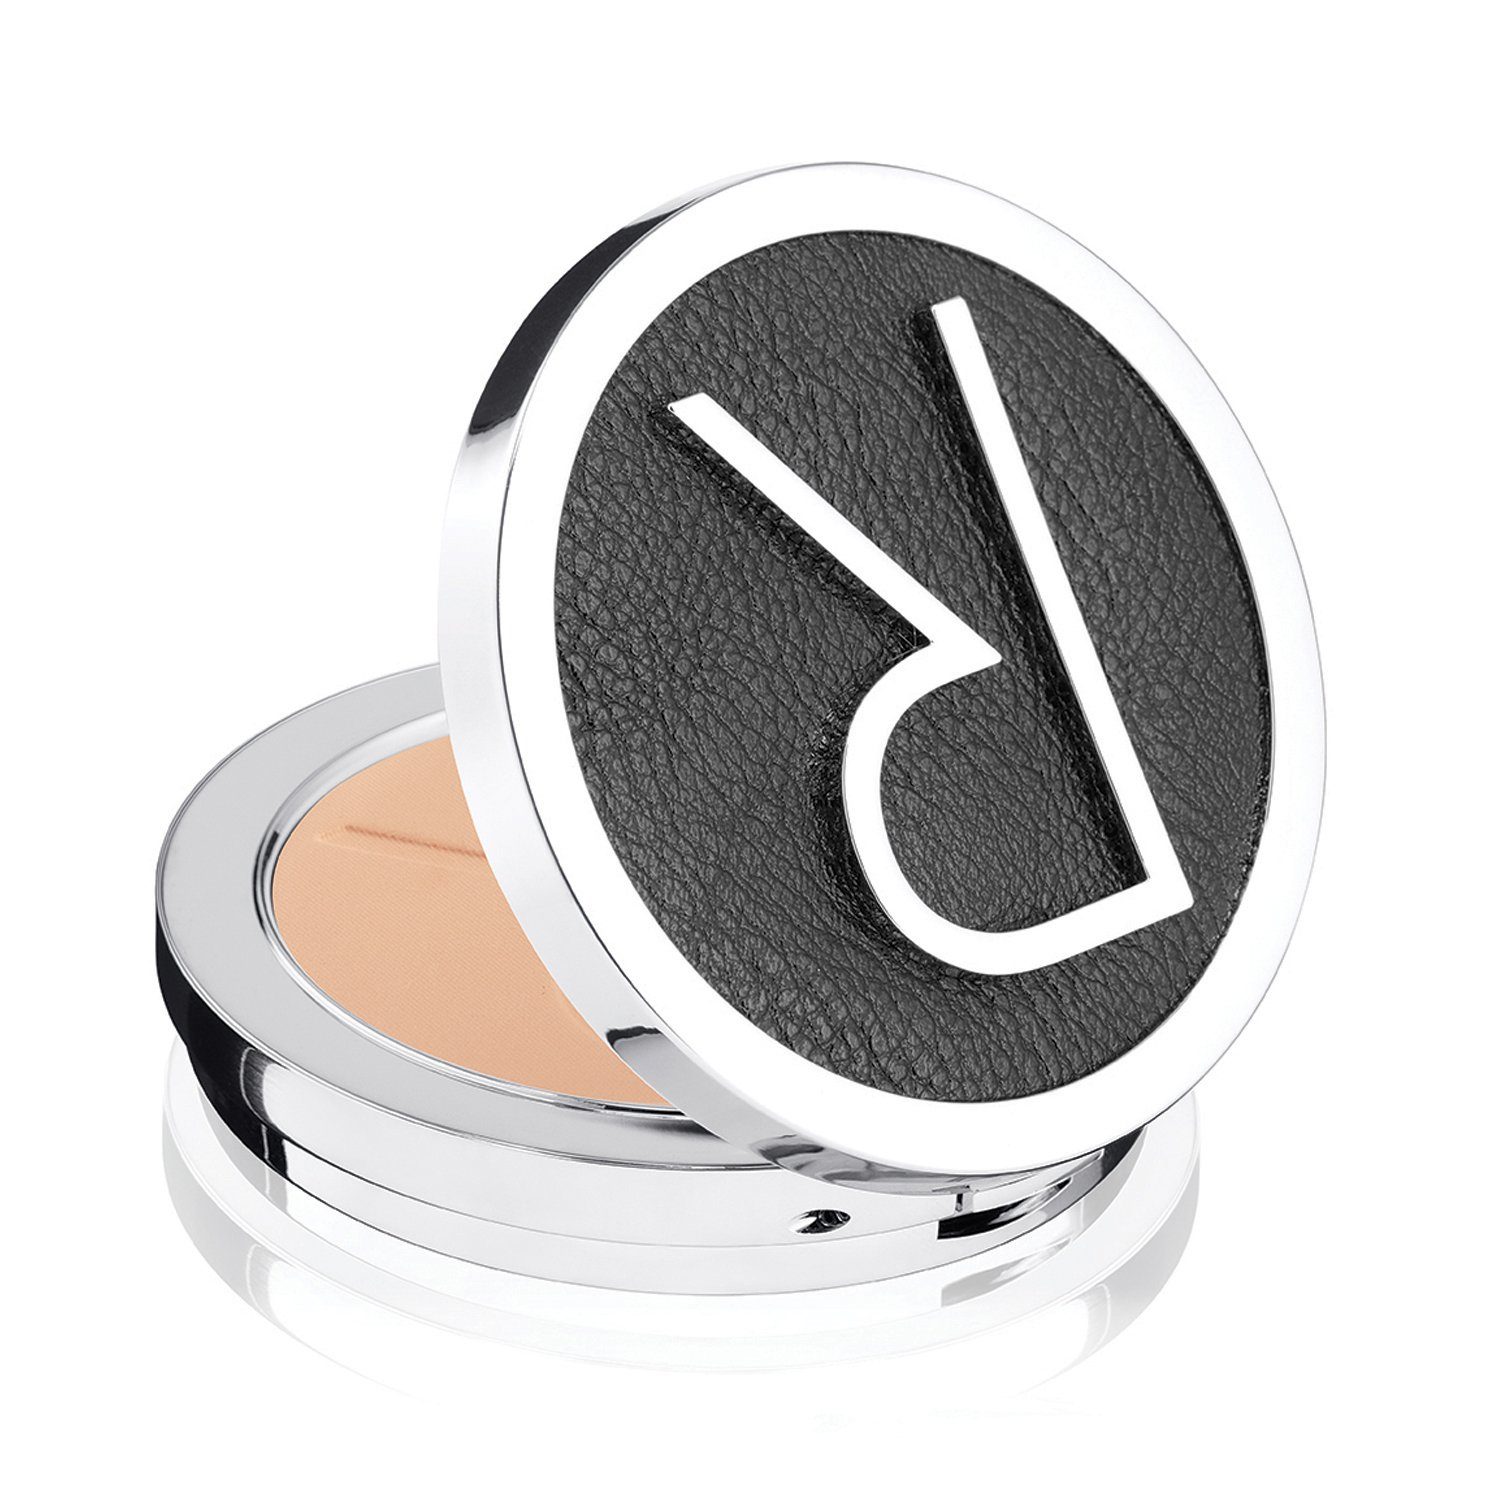 Rodial Puder Rodial Puder Glass Powder Pressed